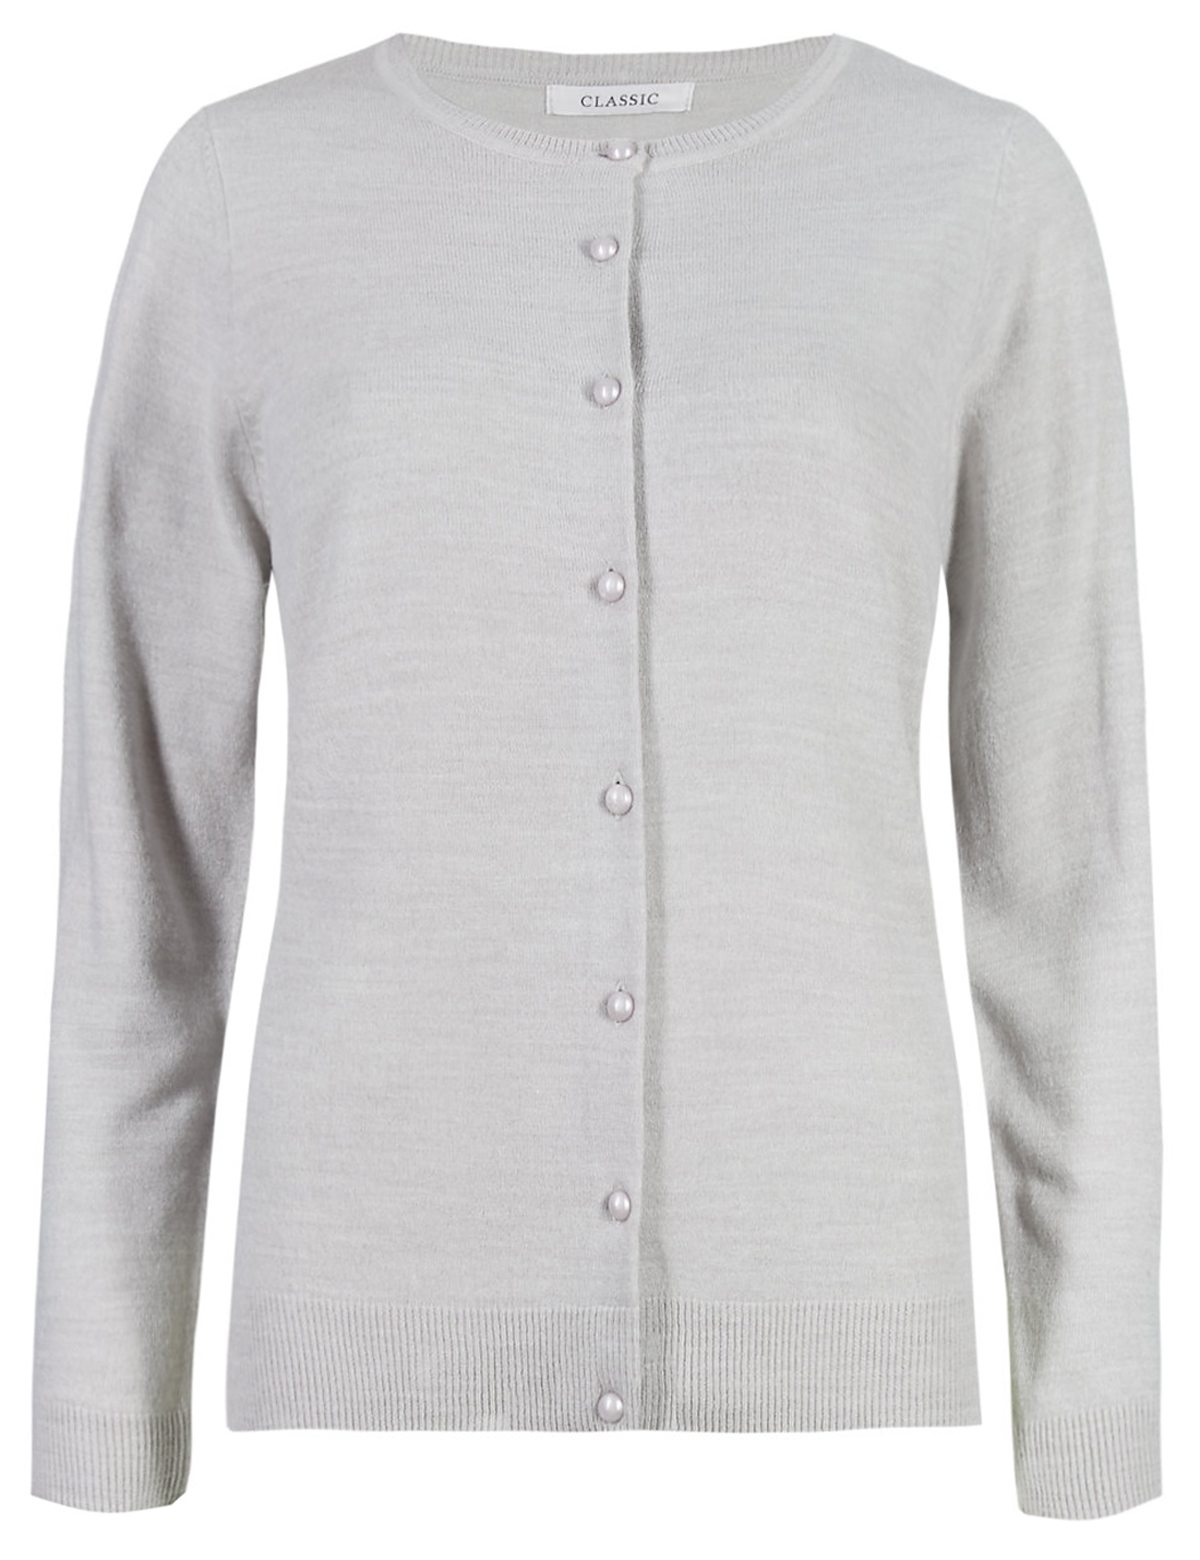 Marks and Spencer - - M&5 SILVER Cashmilon Pearl Effect Button Cardigan ...